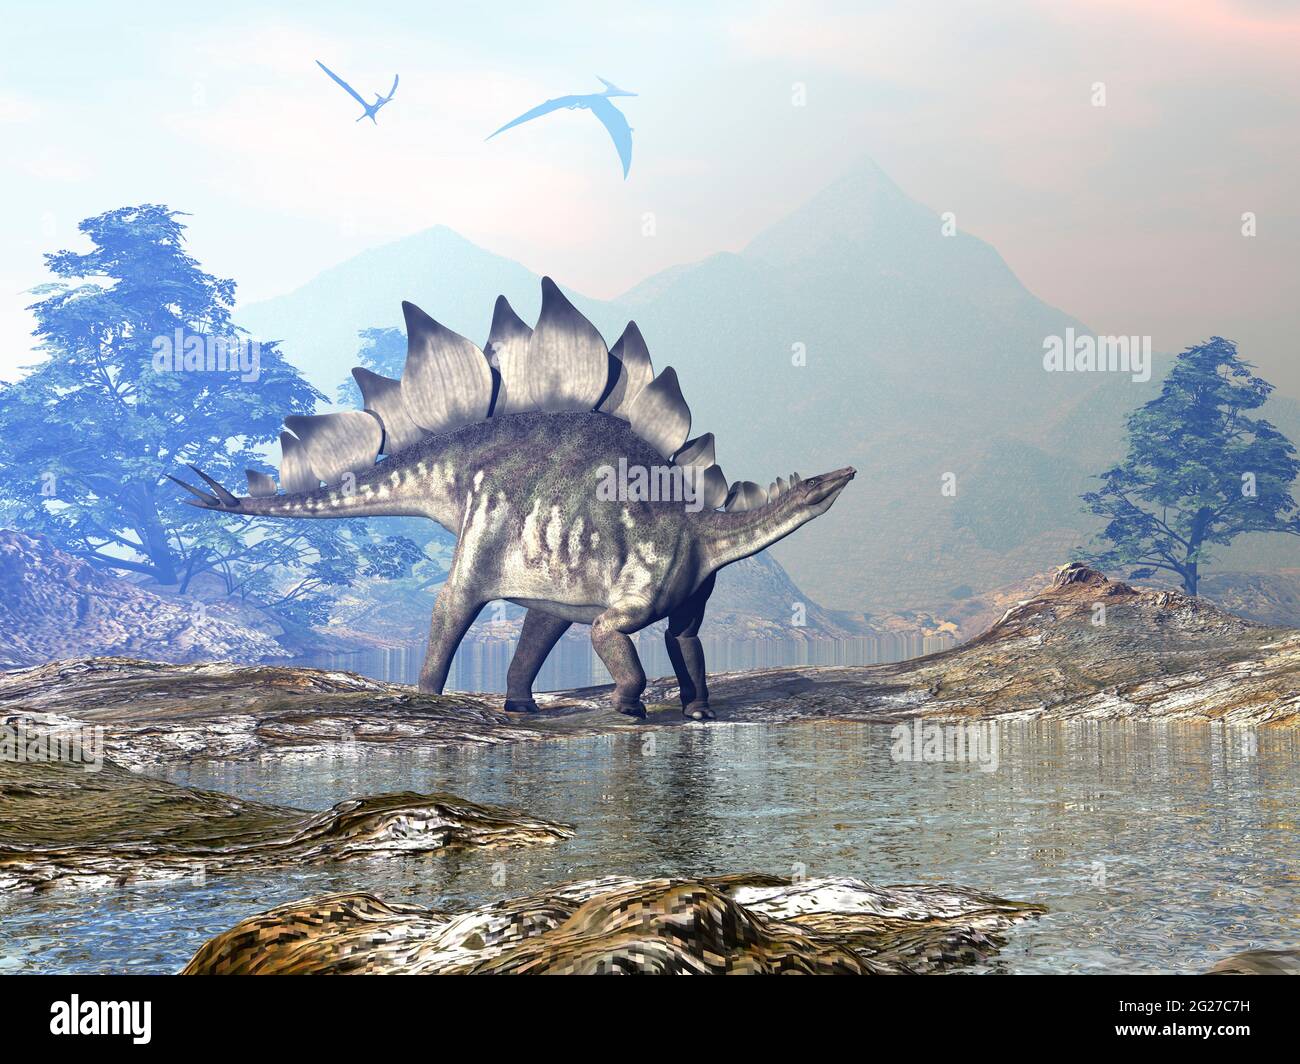 Stegosaurus dinosaur walking in a beautiful landscape with mountains and water. Stock Photo